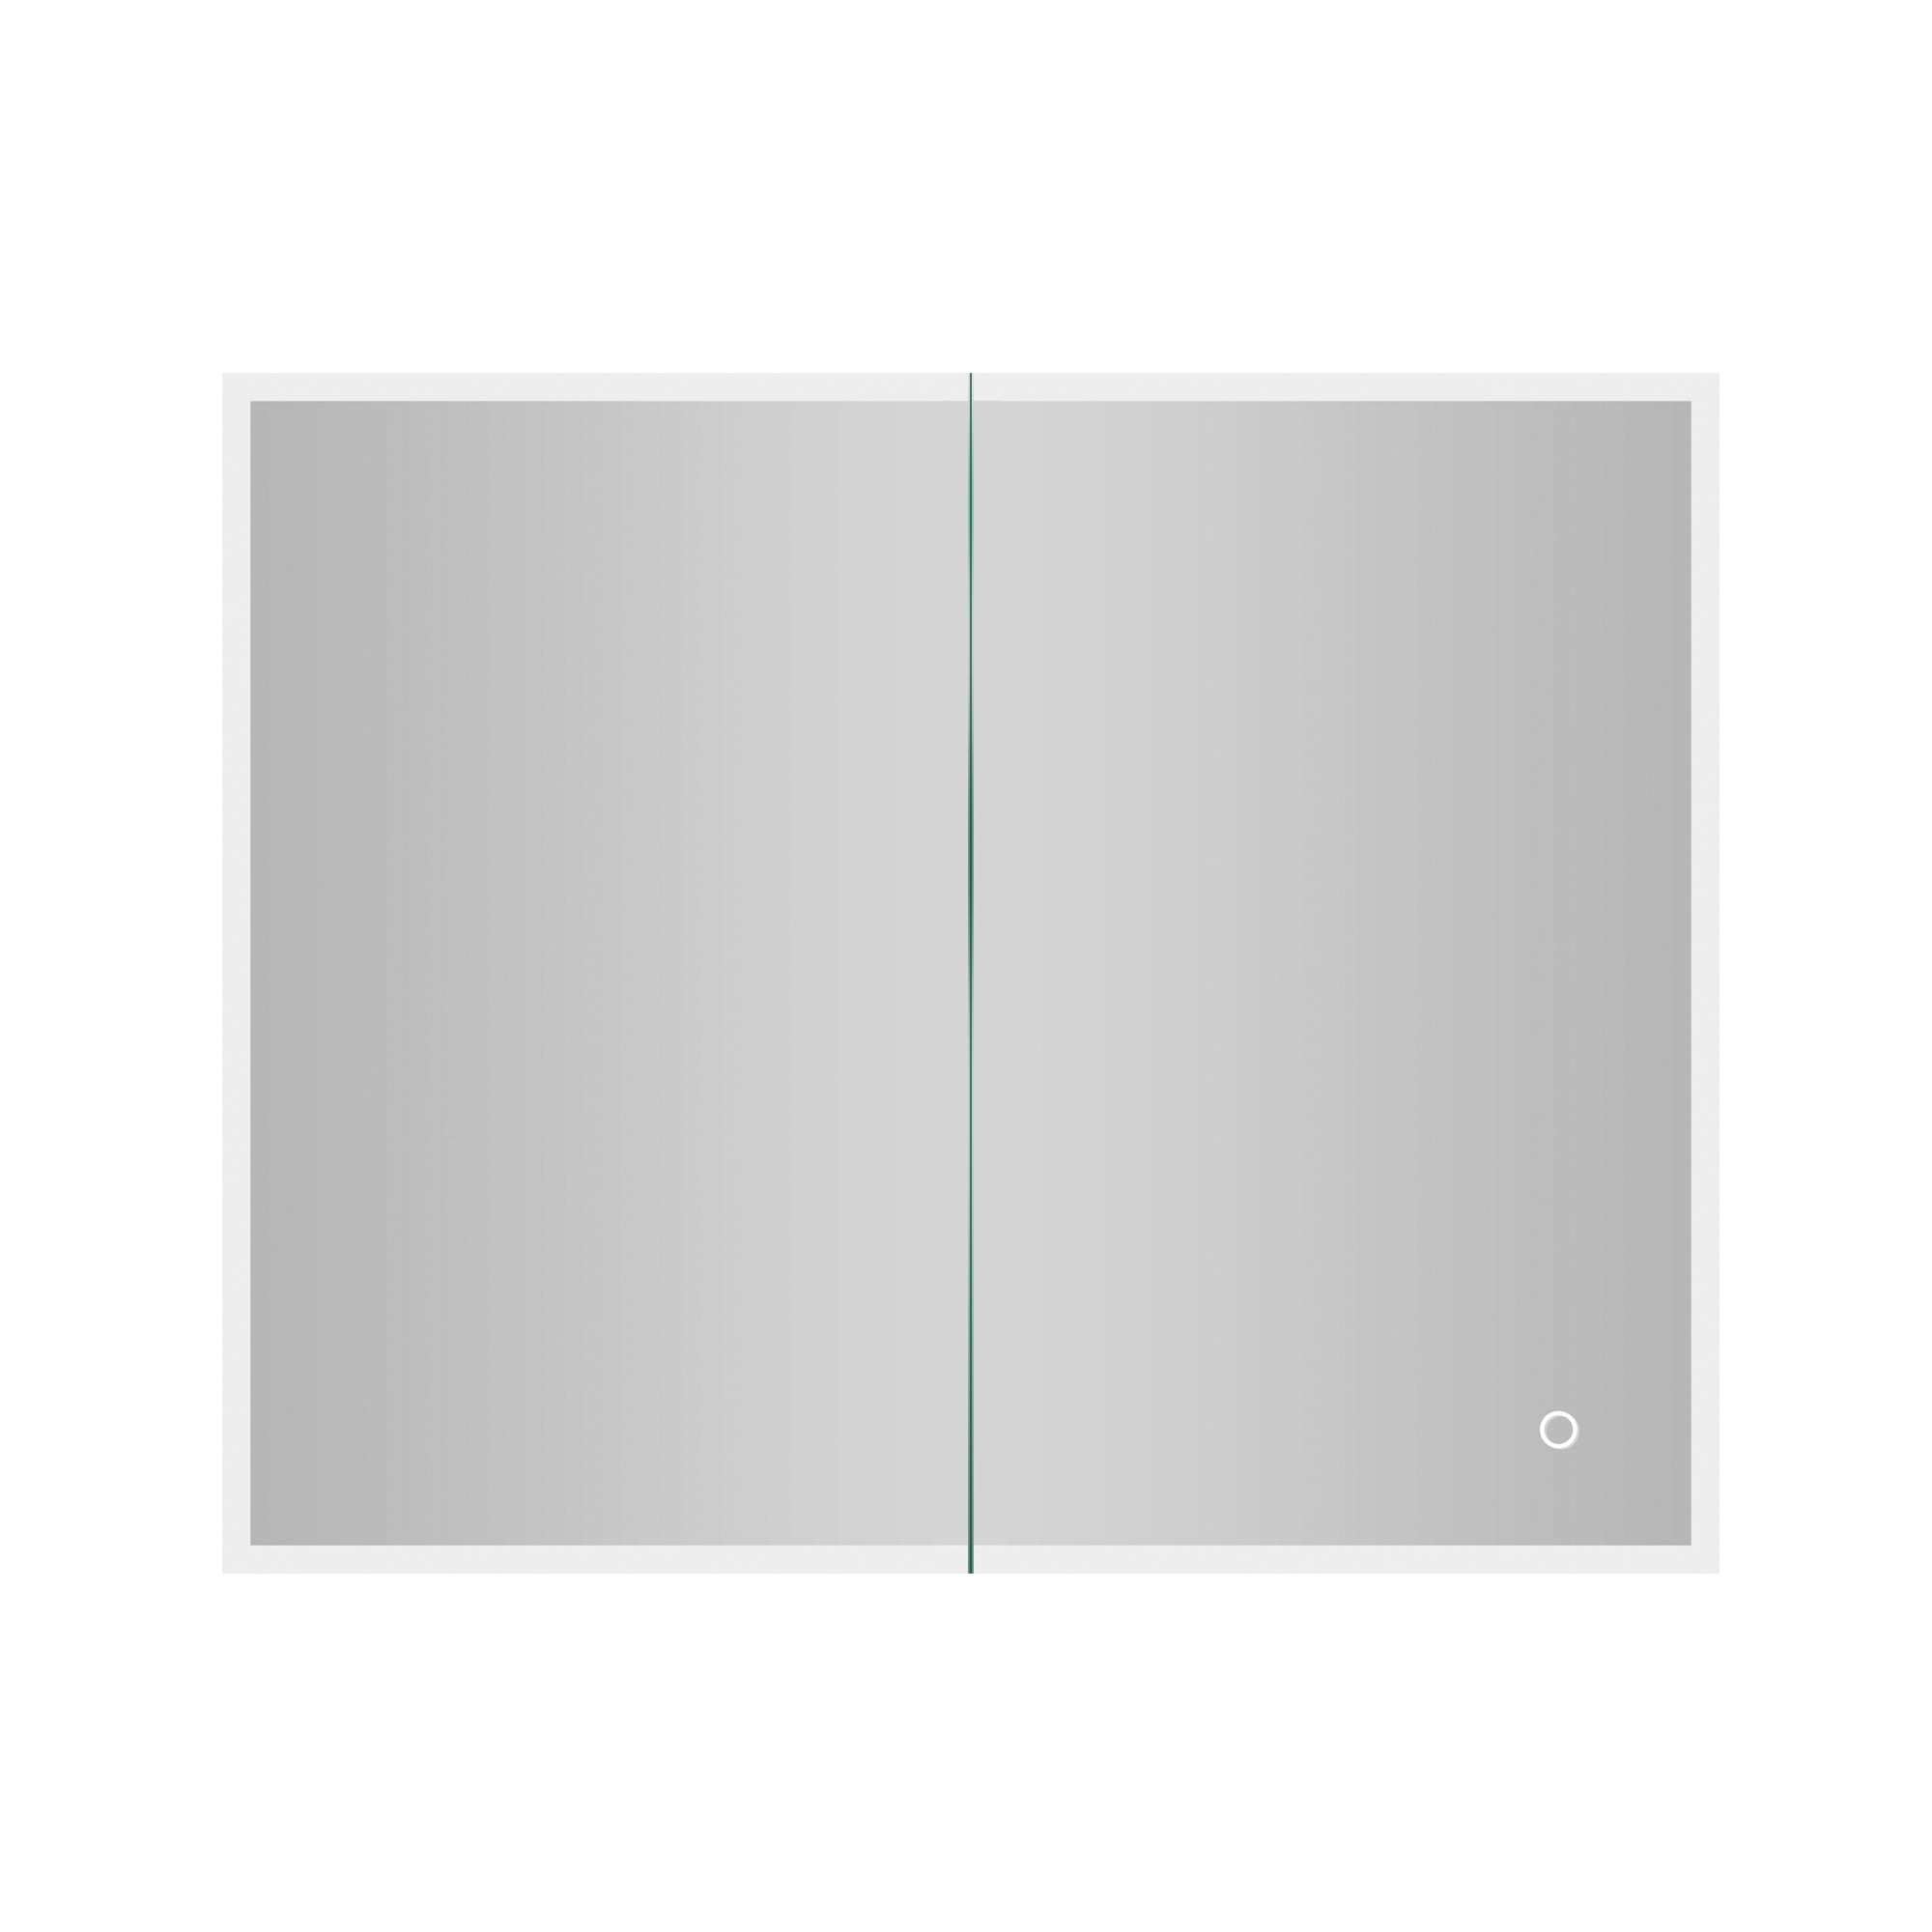 Large Rectangular Silver Aluminum Surface Mount Medicine Cabinet with Mirror